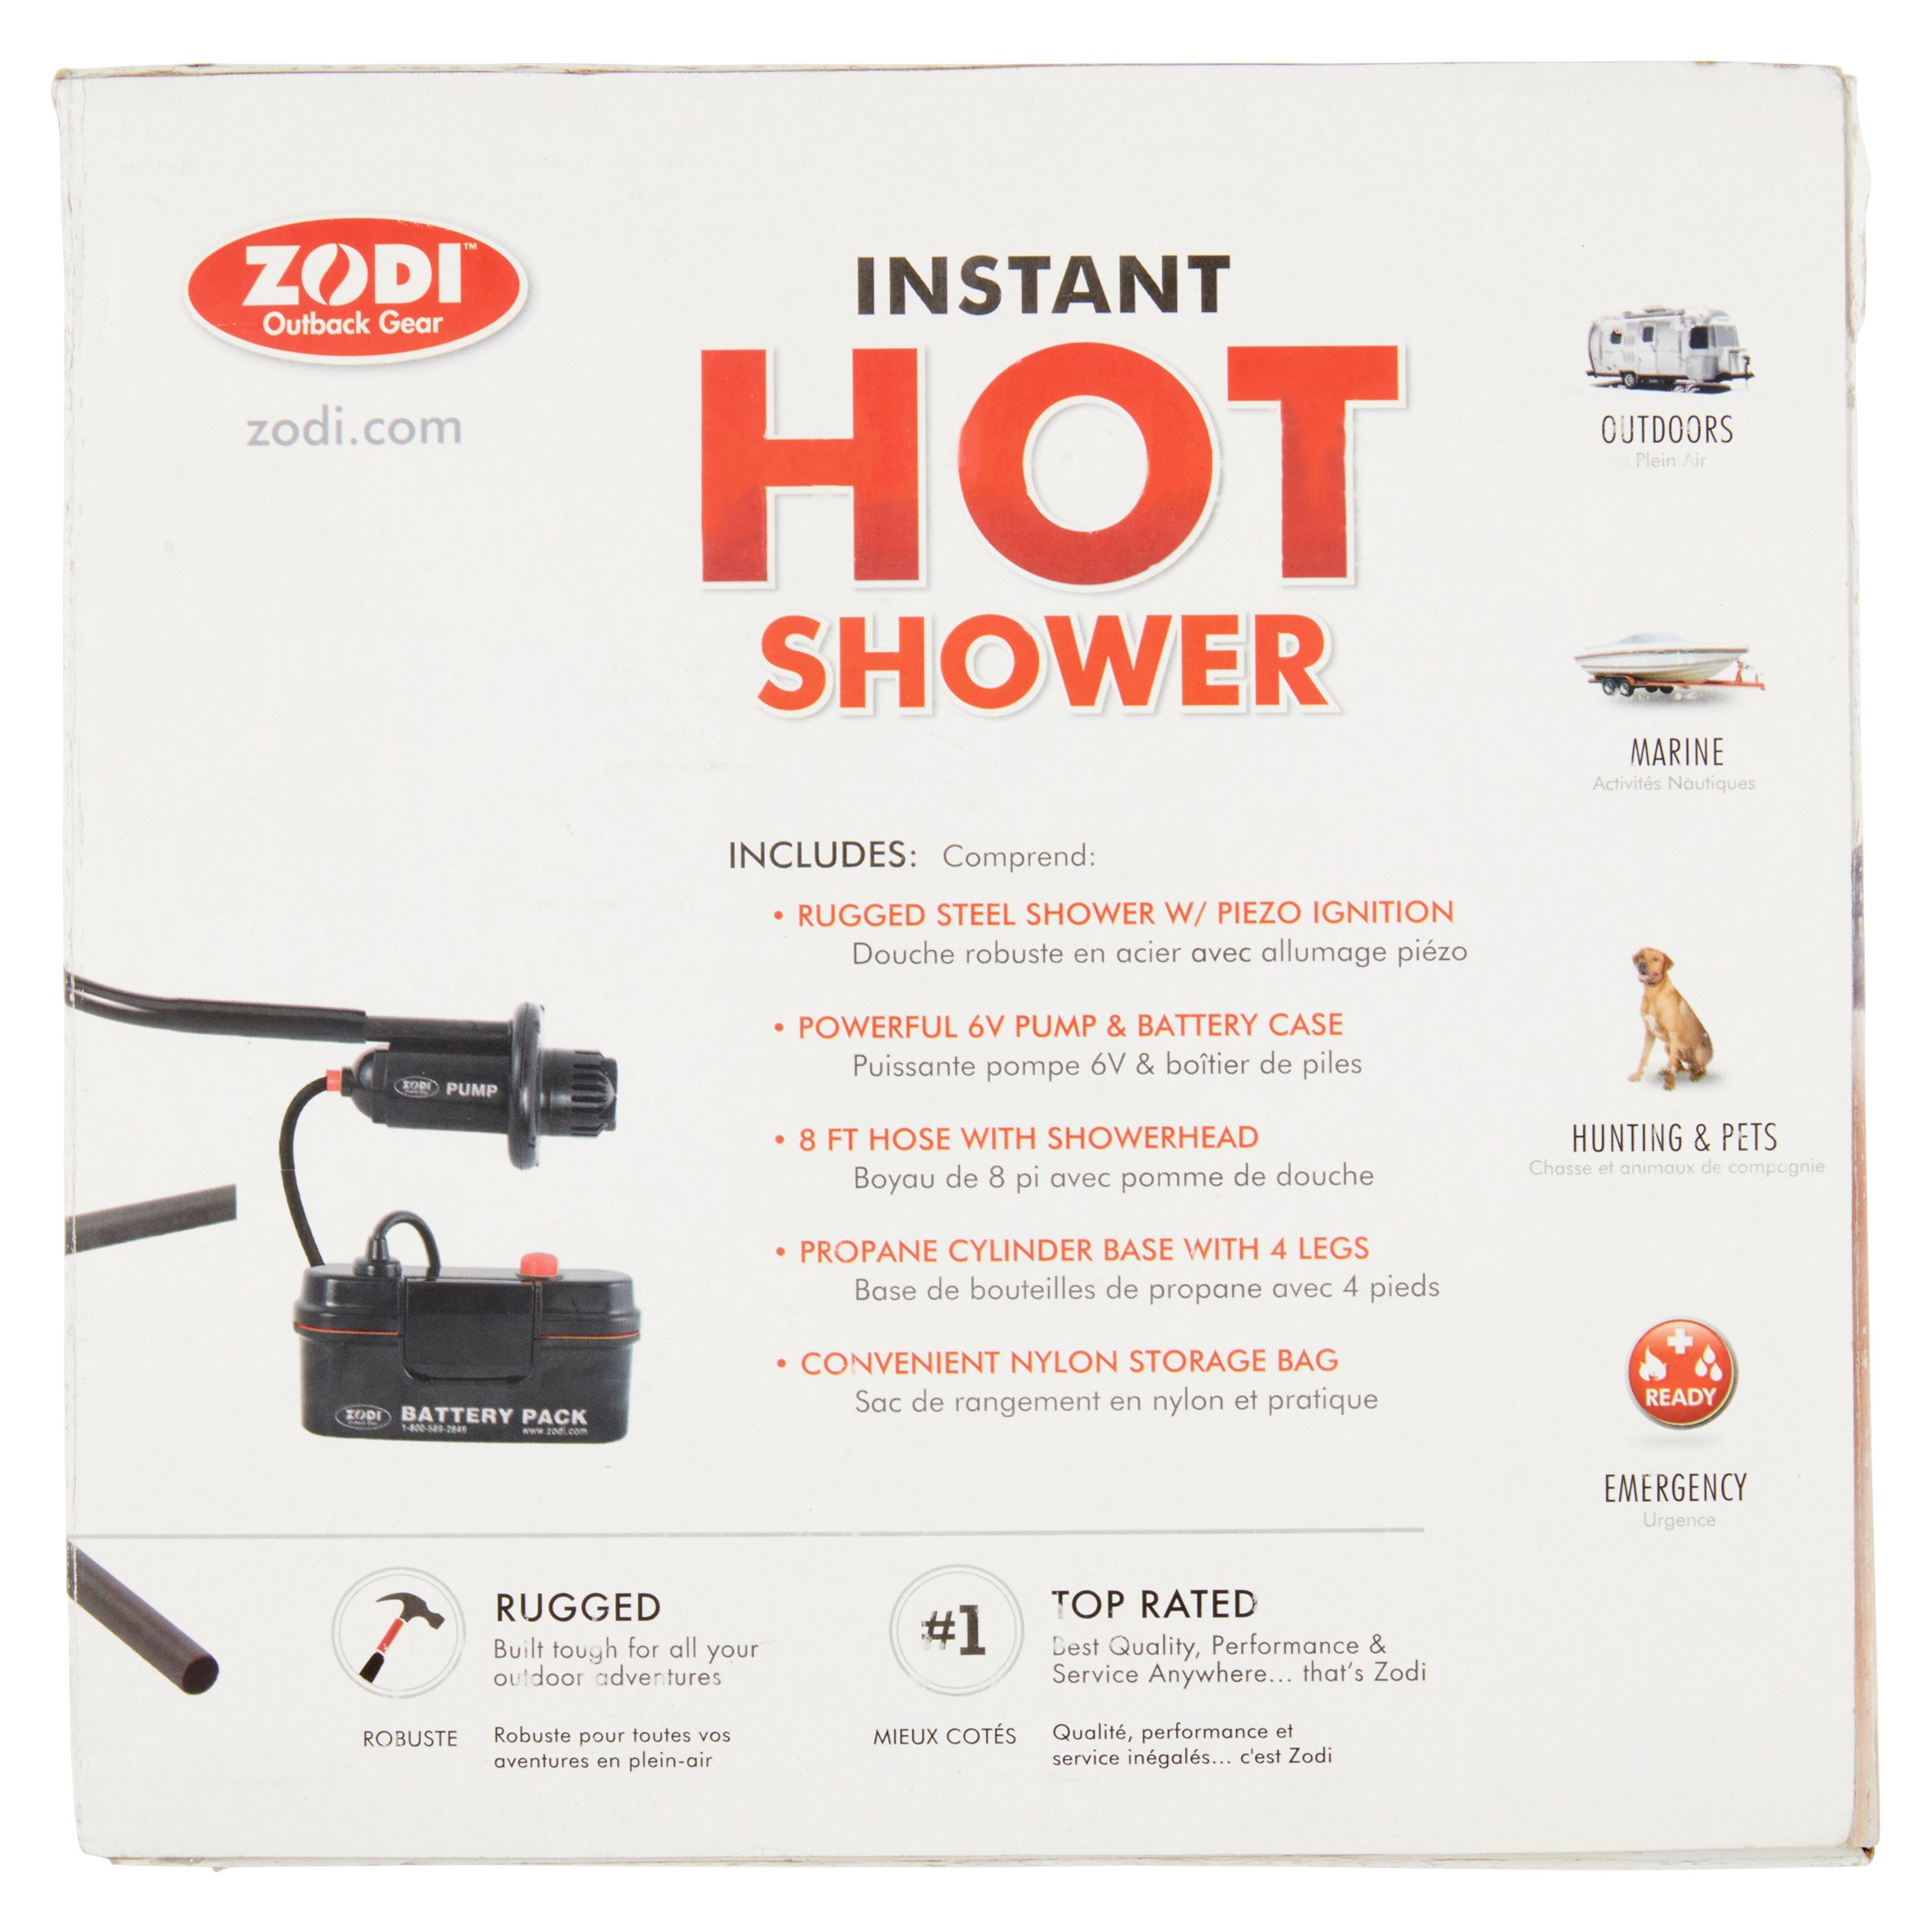 Zodi Outback Gear Instant Hot Shower - image 3 of 5